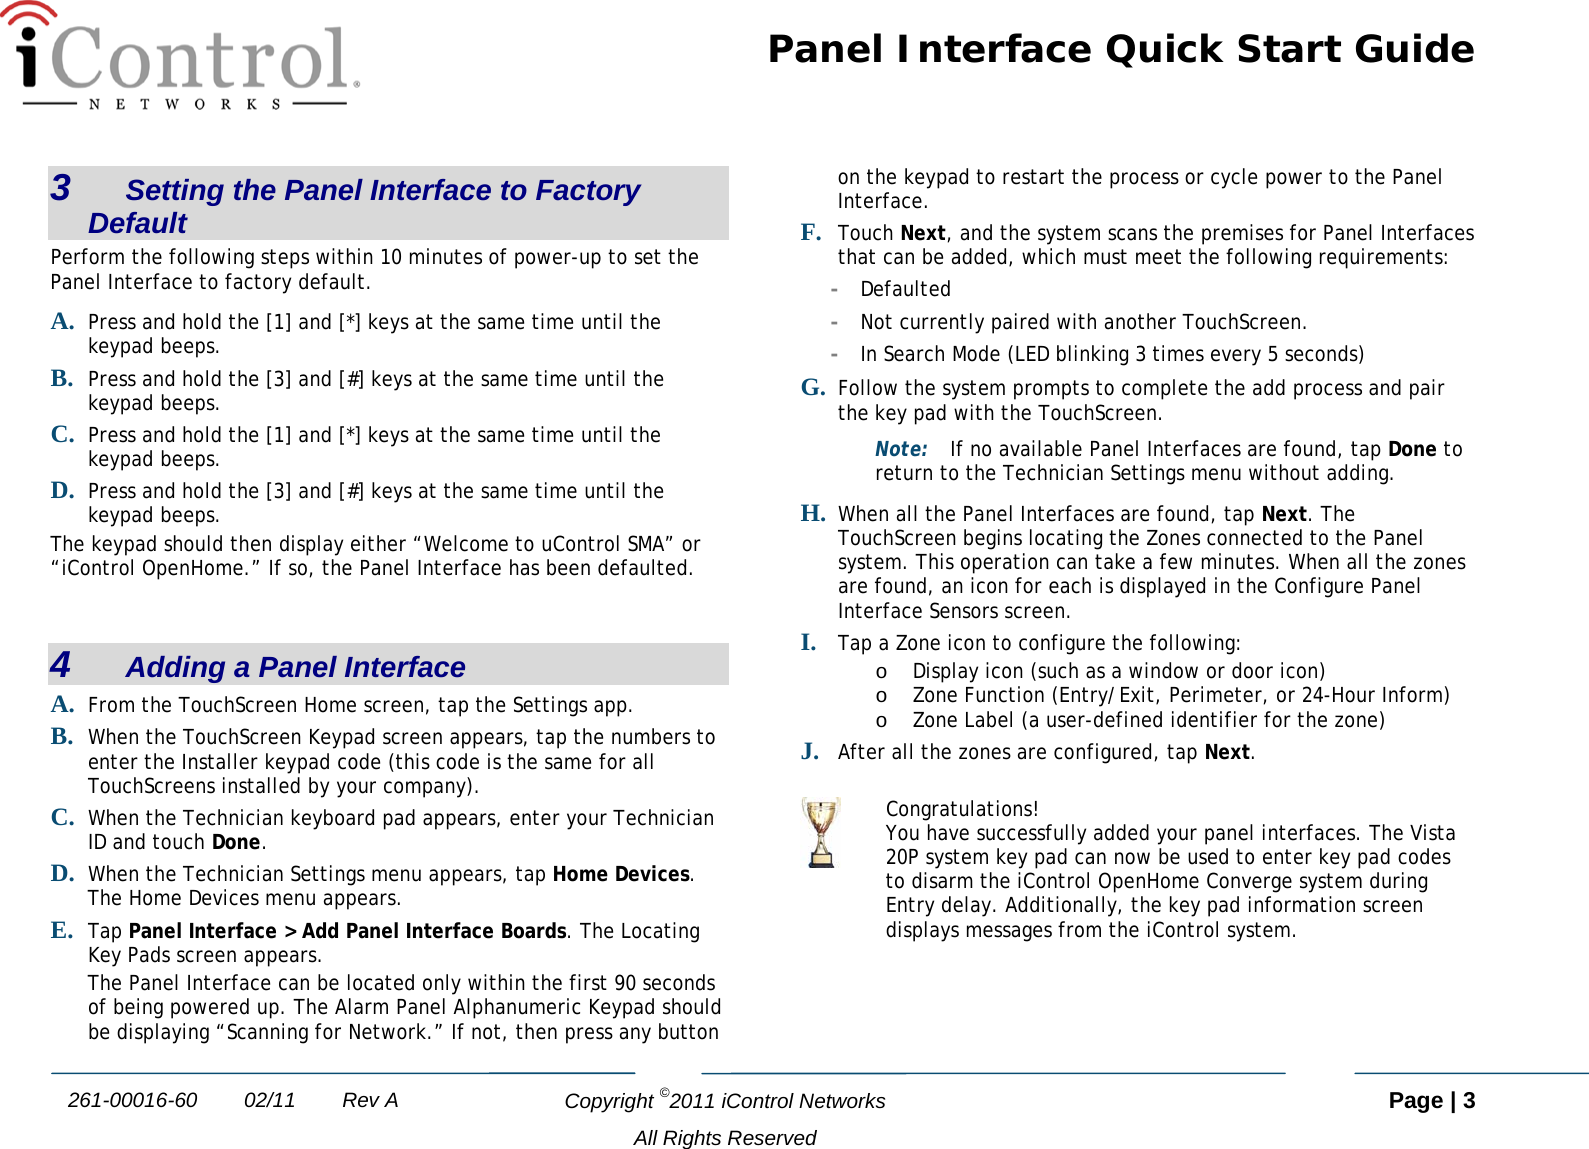 Panel Interface Quick Start Guide   Copyright ©2011 iControl Networks   Page | 3  All Rights Reserved 261-00016-60        02/11        Rev A 3   Setting the Panel Interface to Factory Default Perform the following steps within 10 minutes of power-up to set the Panel Interface to factory default. A. Press and hold the [1] and [*] keys at the same time until the keypad beeps. B. Press and hold the [3] and [#] keys at the same time until the keypad beeps. C. Press and hold the [1] and [*] keys at the same time until the keypad beeps. D. Press and hold the [3] and [#] keys at the same time until the keypad beeps. The keypad should then display either “Welcome to uControl SMA” or “iControl OpenHome.” If so, the Panel Interface has been defaulted.  4   Adding a Panel Interface A. From the TouchScreen Home screen, tap the Settings app. B. When the TouchScreen Keypad screen appears, tap the numbers to enter the Installer keypad code (this code is the same for all TouchScreens installed by your company). C. When the Technician keyboard pad appears, enter your Technician ID and touch Done. D. When the Technician Settings menu appears, tap Home Devices. The Home Devices menu appears. E. Tap Panel Interface &gt; Add Panel Interface Boards. The Locating Key Pads screen appears. The Panel Interface can be located only within the first 90 seconds of being powered up. The Alarm Panel Alphanumeric Keypad should be displaying “Scanning for Network.” If not, then press any button on the keypad to restart the process or cycle power to the Panel Interface.  F. Touch Next, and the system scans the premises for Panel Interfaces that can be added, which must meet the following requirements: -  Defaulted -  Not currently paired with another TouchScreen. -  In Search Mode (LED blinking 3 times every 5 seconds) G. Follow the system prompts to complete the add process and pair the key pad with the TouchScreen. Note: If no available Panel Interfaces are found, tap Done to return to the Technician Settings menu without adding.  H. When all the Panel Interfaces are found, tap Next. The TouchScreen begins locating the Zones connected to the Panel system. This operation can take a few minutes. When all the zones are found, an icon for each is displayed in the Configure Panel Interface Sensors screen. I. Tap a Zone icon to configure the following: o Display icon (such as a window or door icon) o Zone Function (Entry/Exit, Perimeter, or 24-Hour Inform) o Zone Label (a user-defined identifier for the zone) J. After all the zones are configured, tap Next.   Congratulations! You have successfully added your panel interfaces. The Vista 20P system key pad can now be used to enter key pad codes to disarm the iControl OpenHome Converge system during Entry delay. Additionally, the key pad information screen displays messages from the iControl system.   